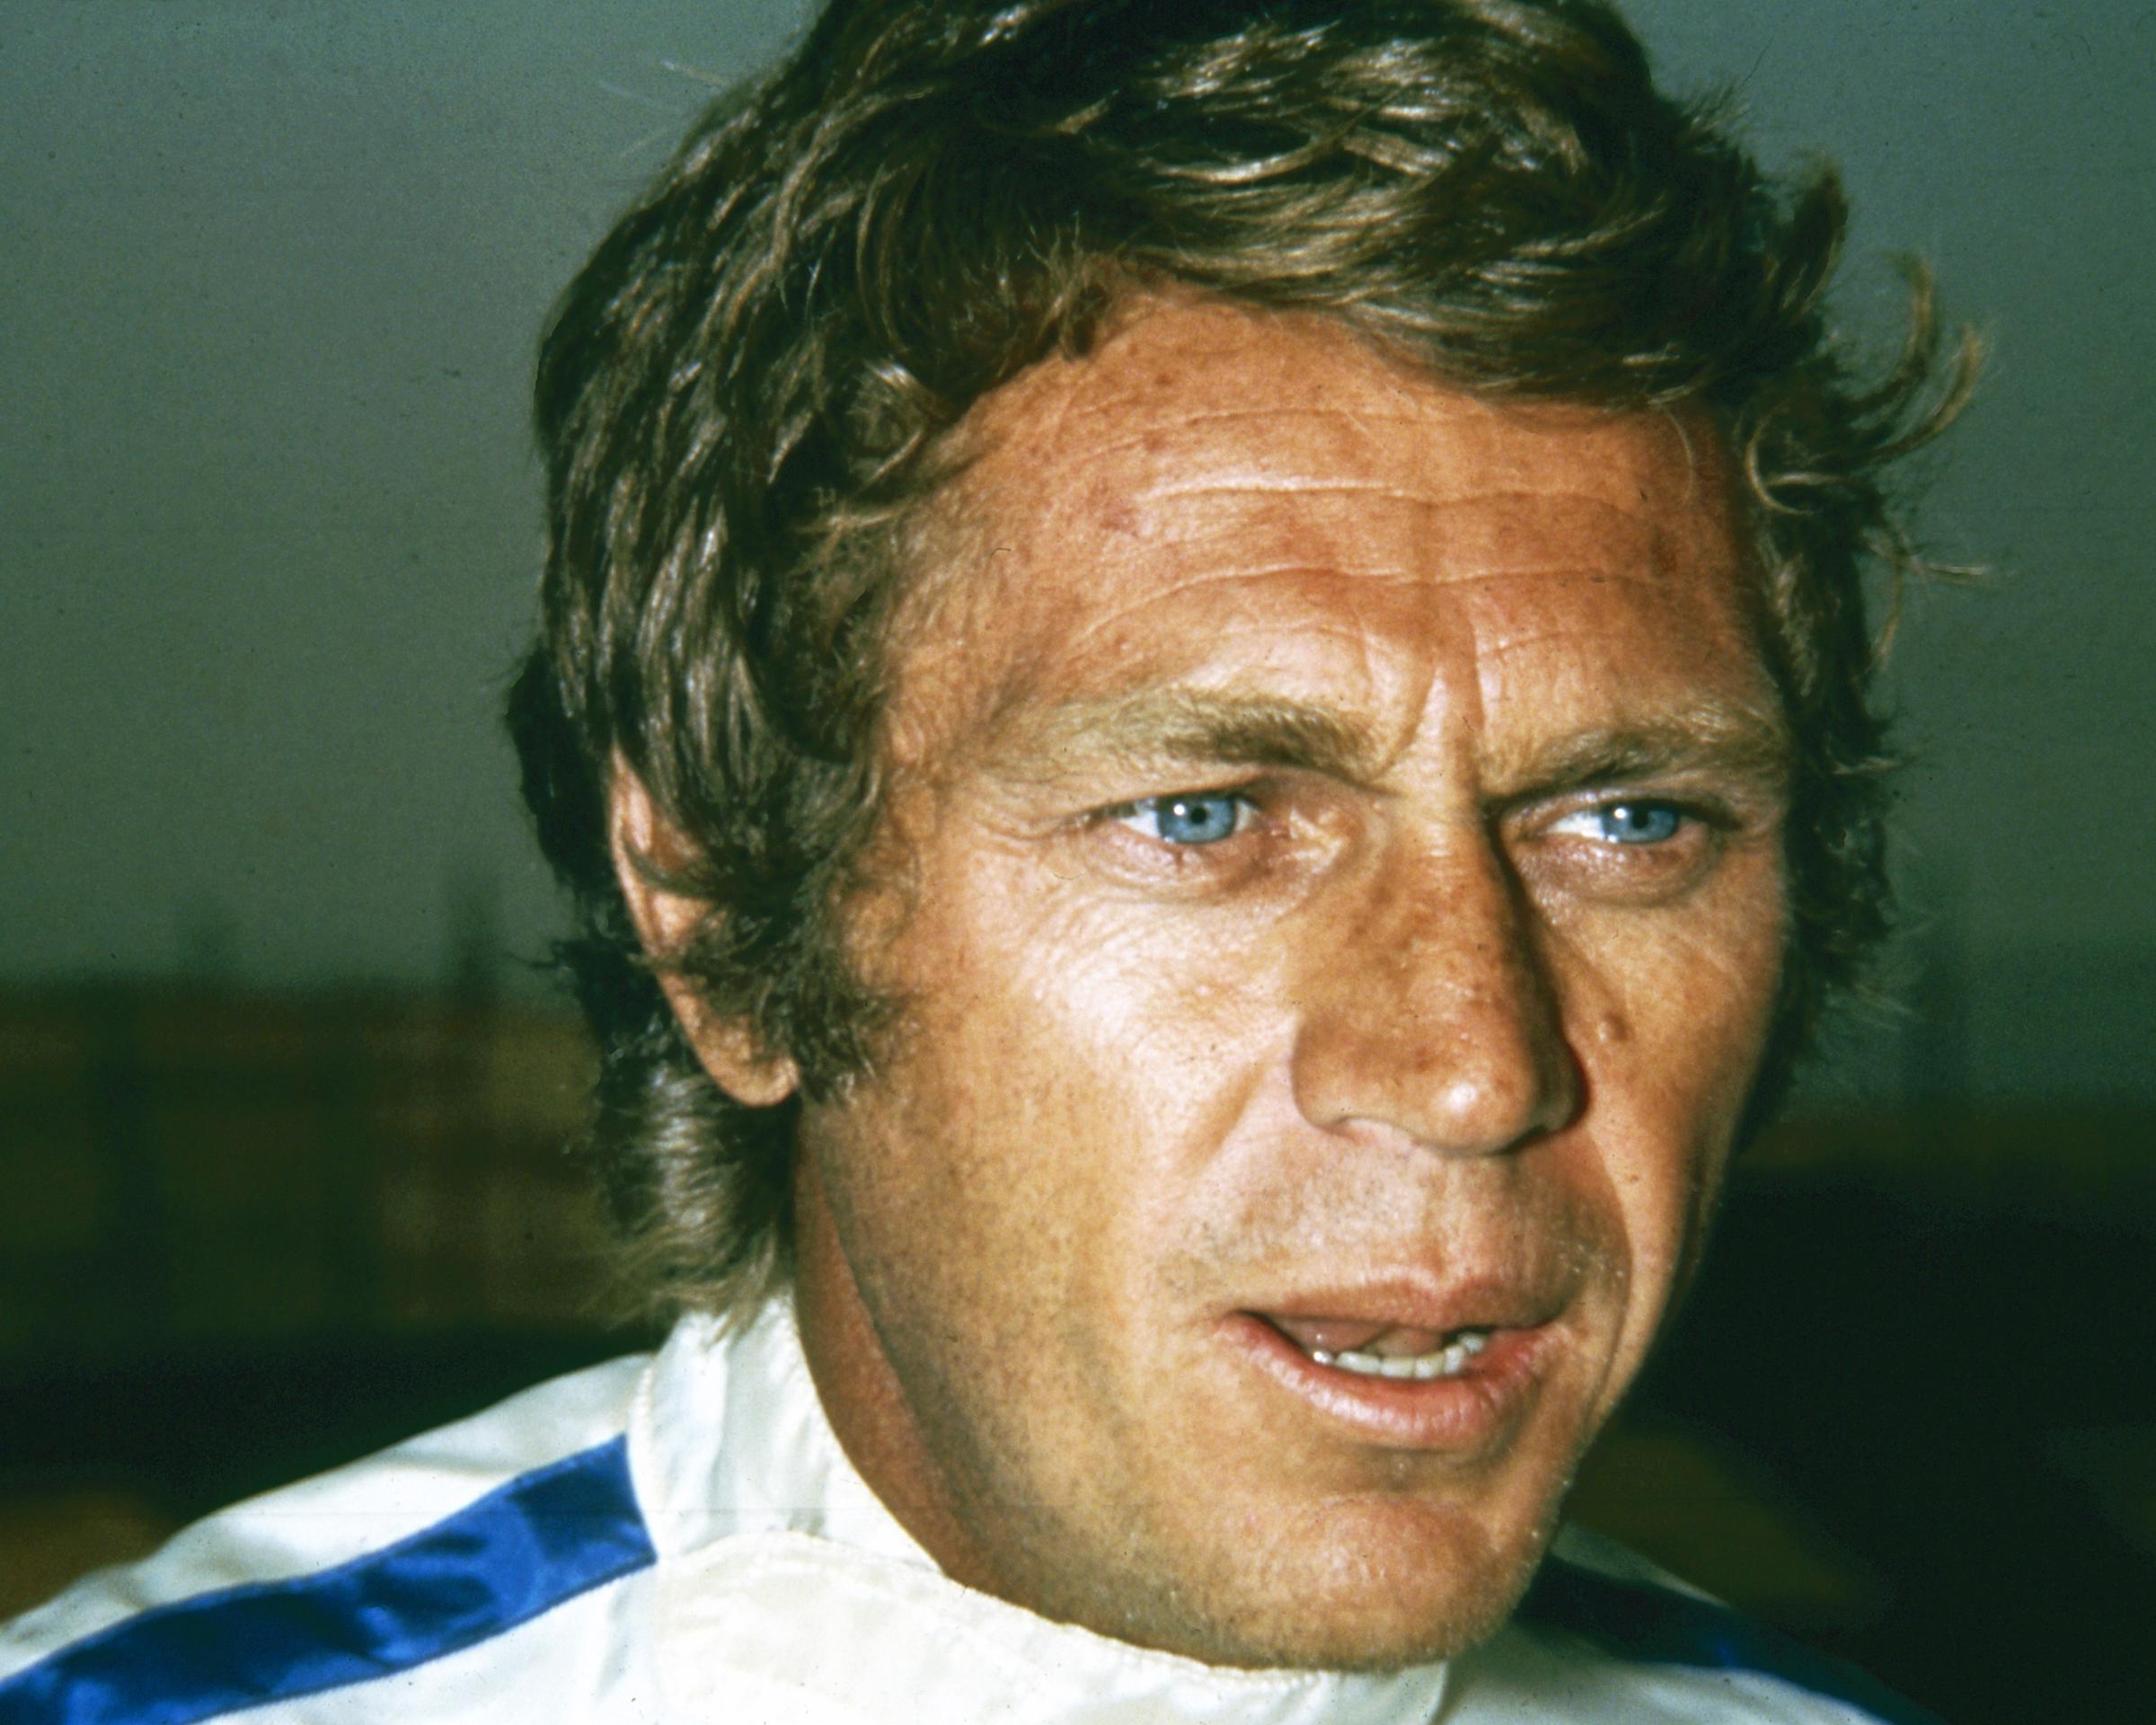 Steve McQueen circa 1971 | Source: Getty Images